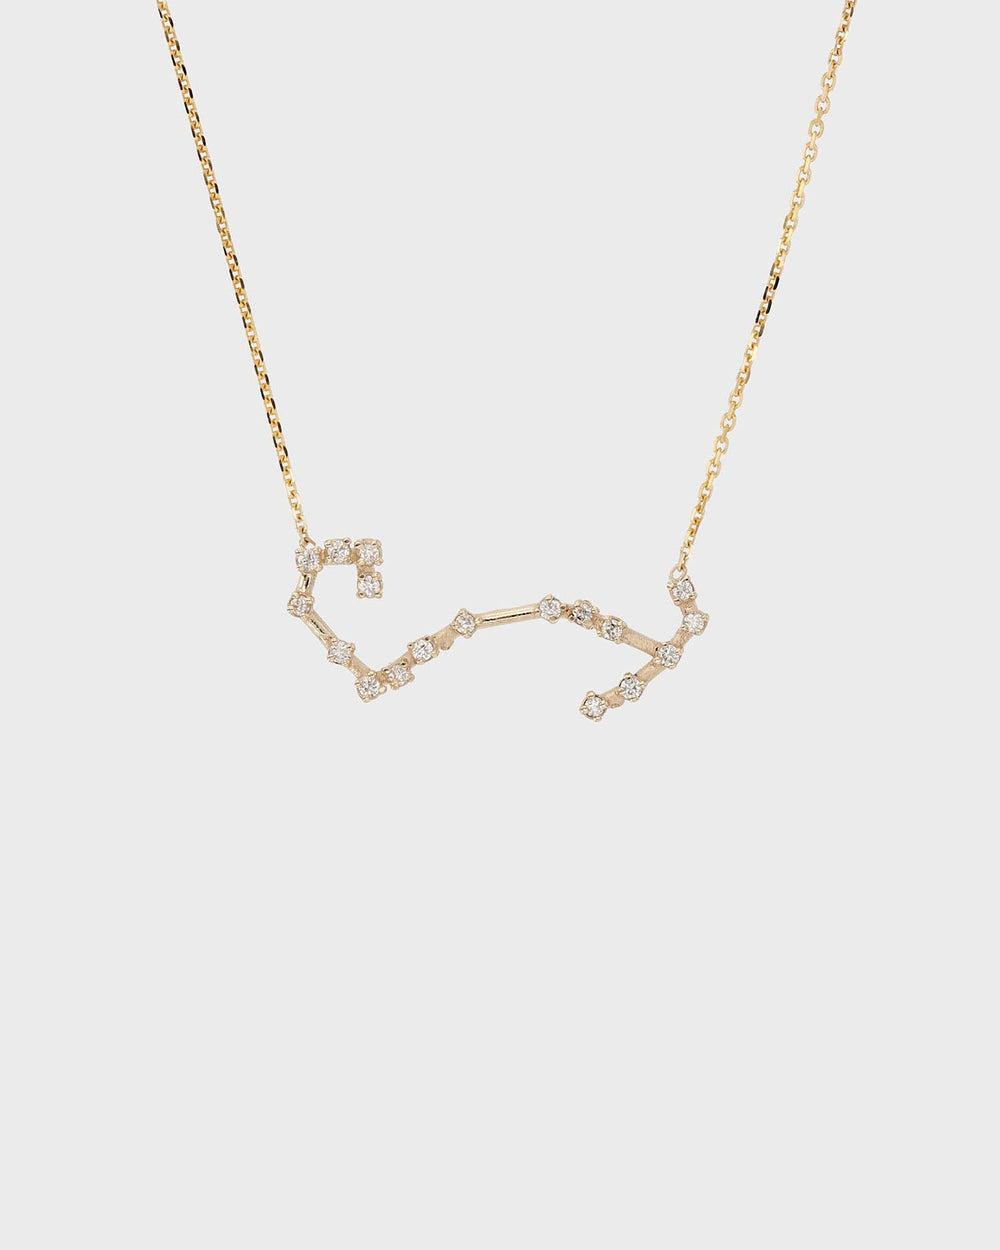 Cancer Diamond Constellation Necklace - Vincents Fine Jewelry